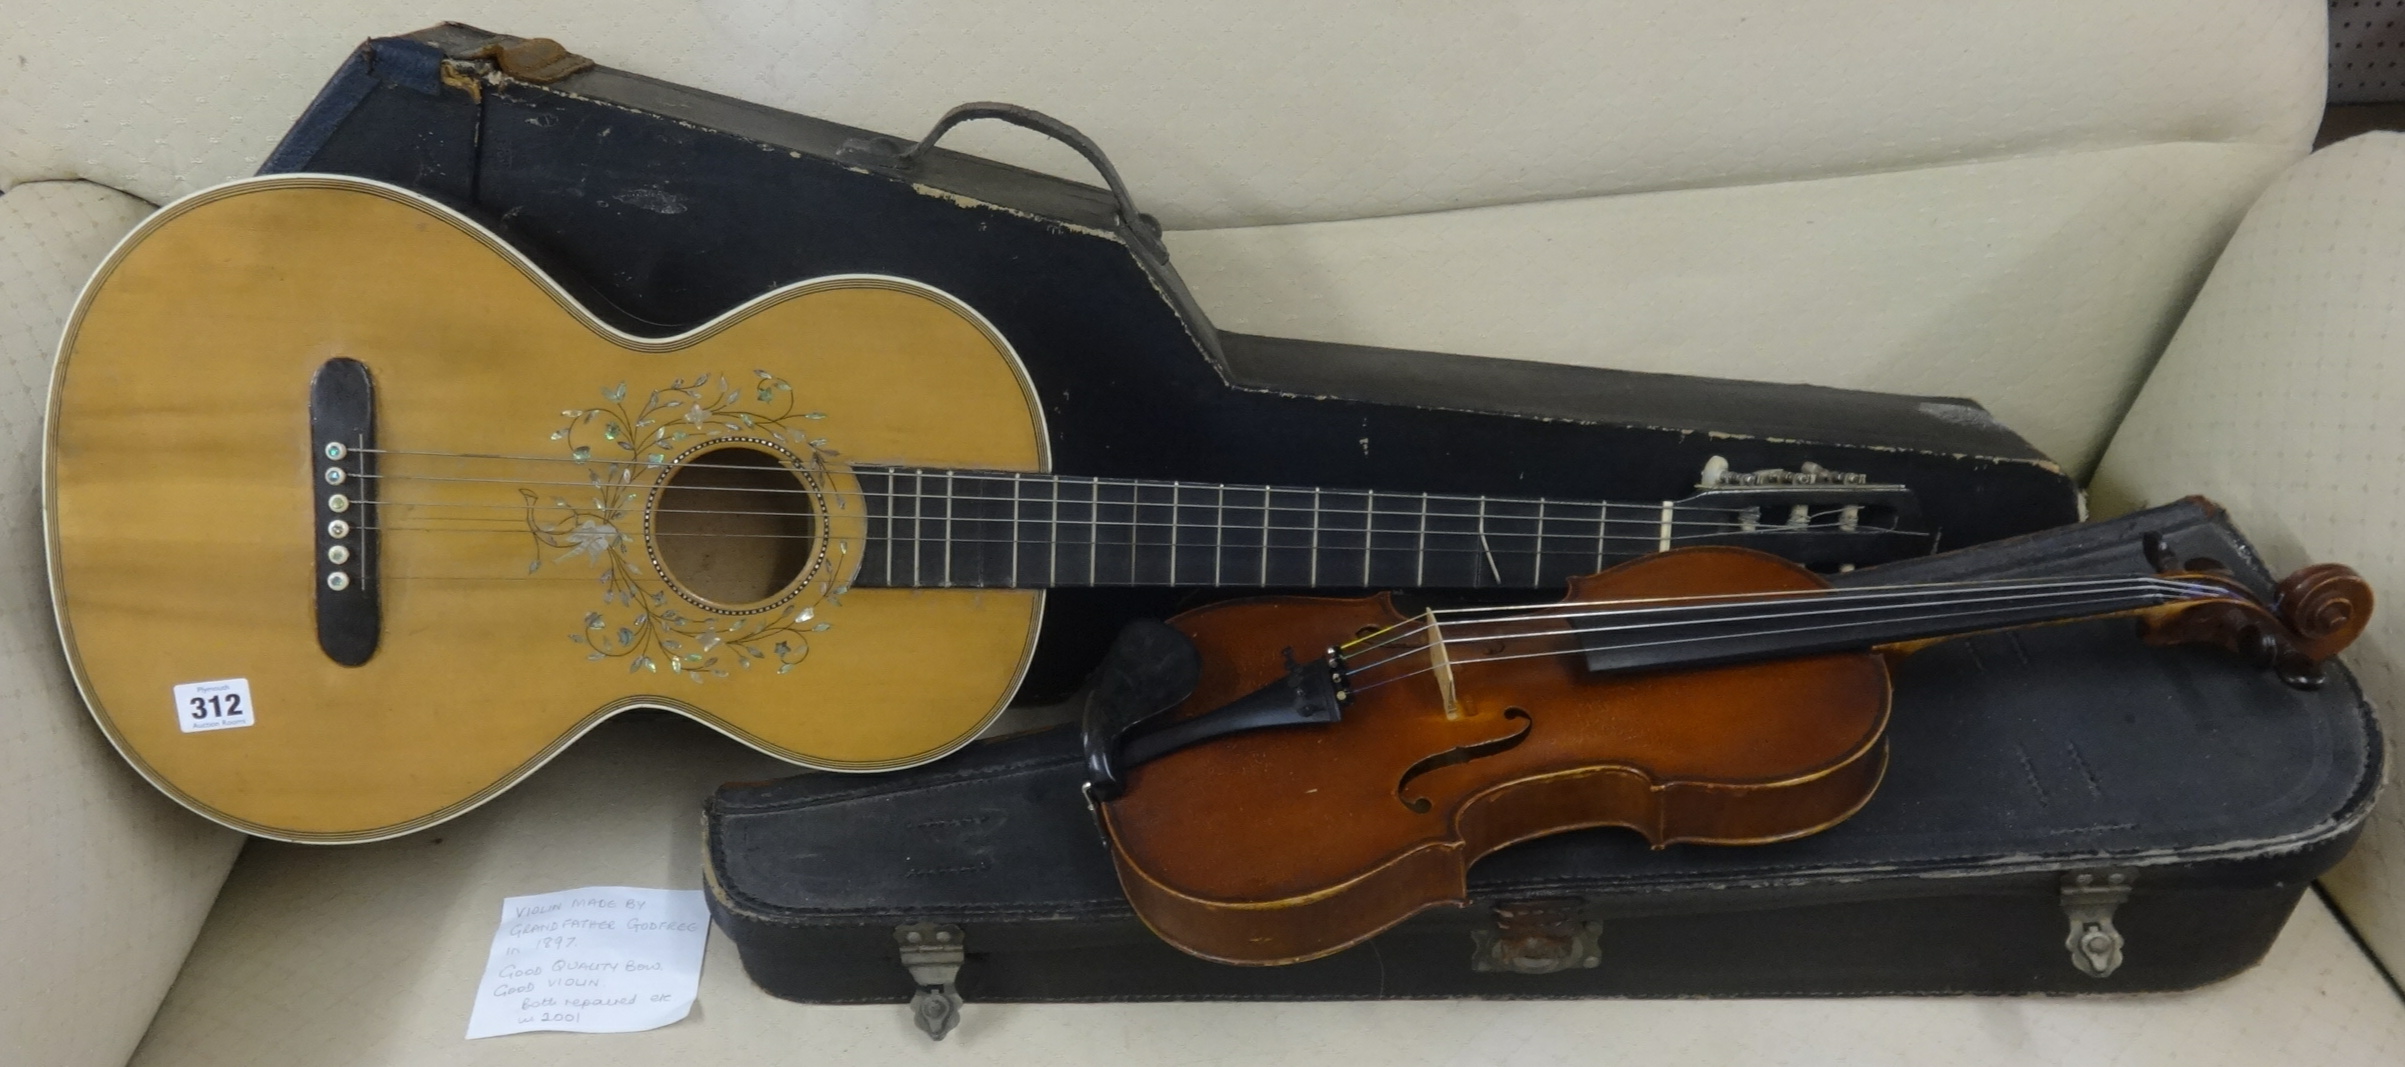 A six string classical guitar and case together with an old violin, reputedly made by the owners